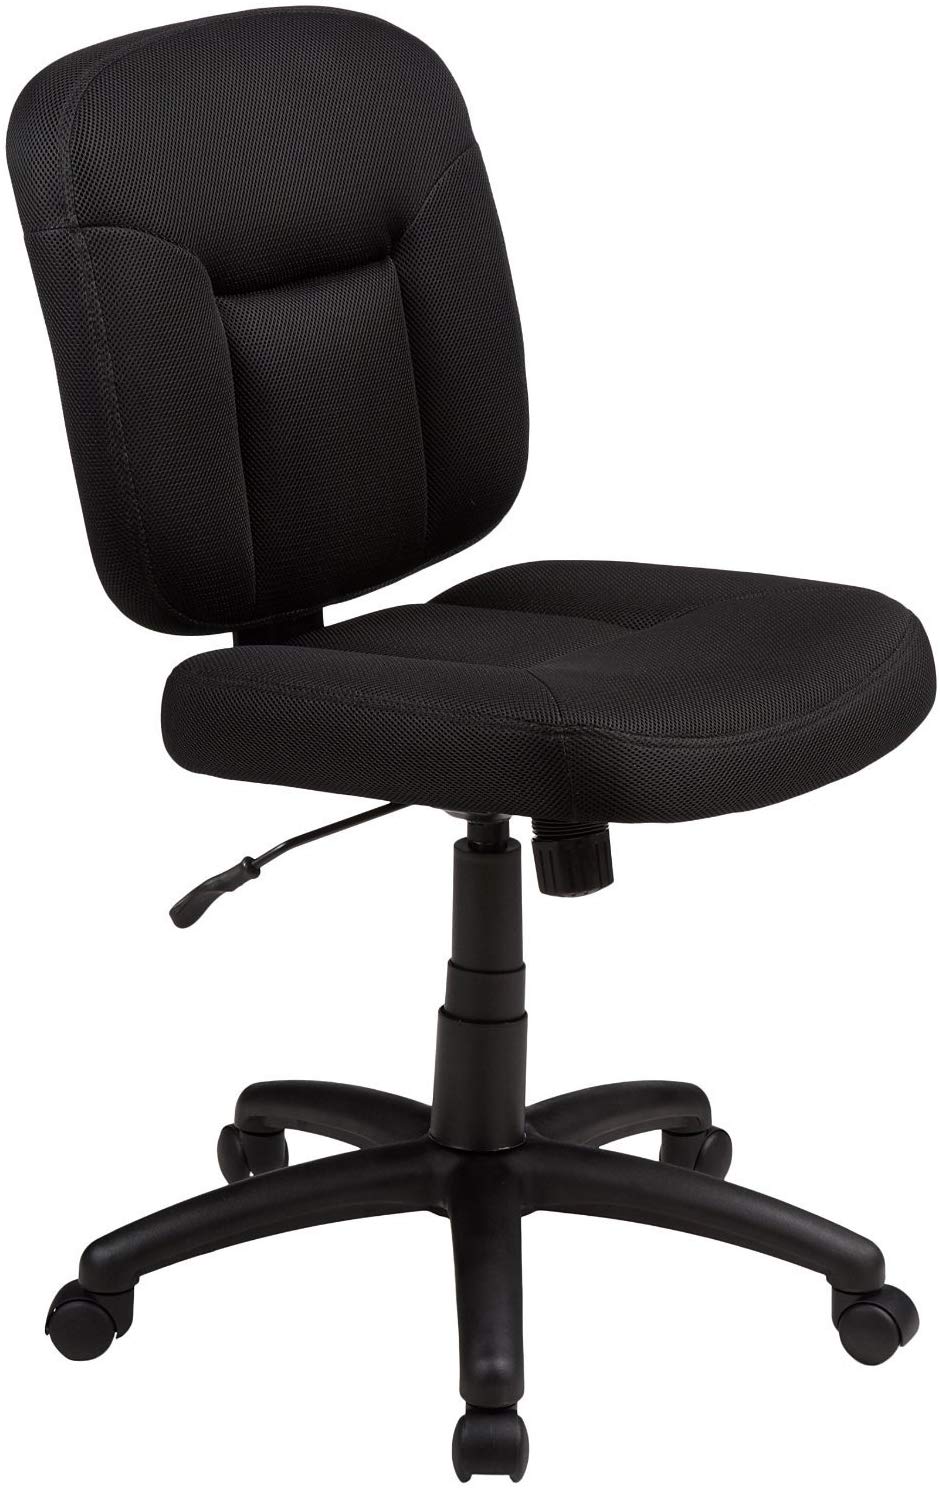 Amazon Basics Low-Back Computer Task Office Desk Chair with Swivel Casters